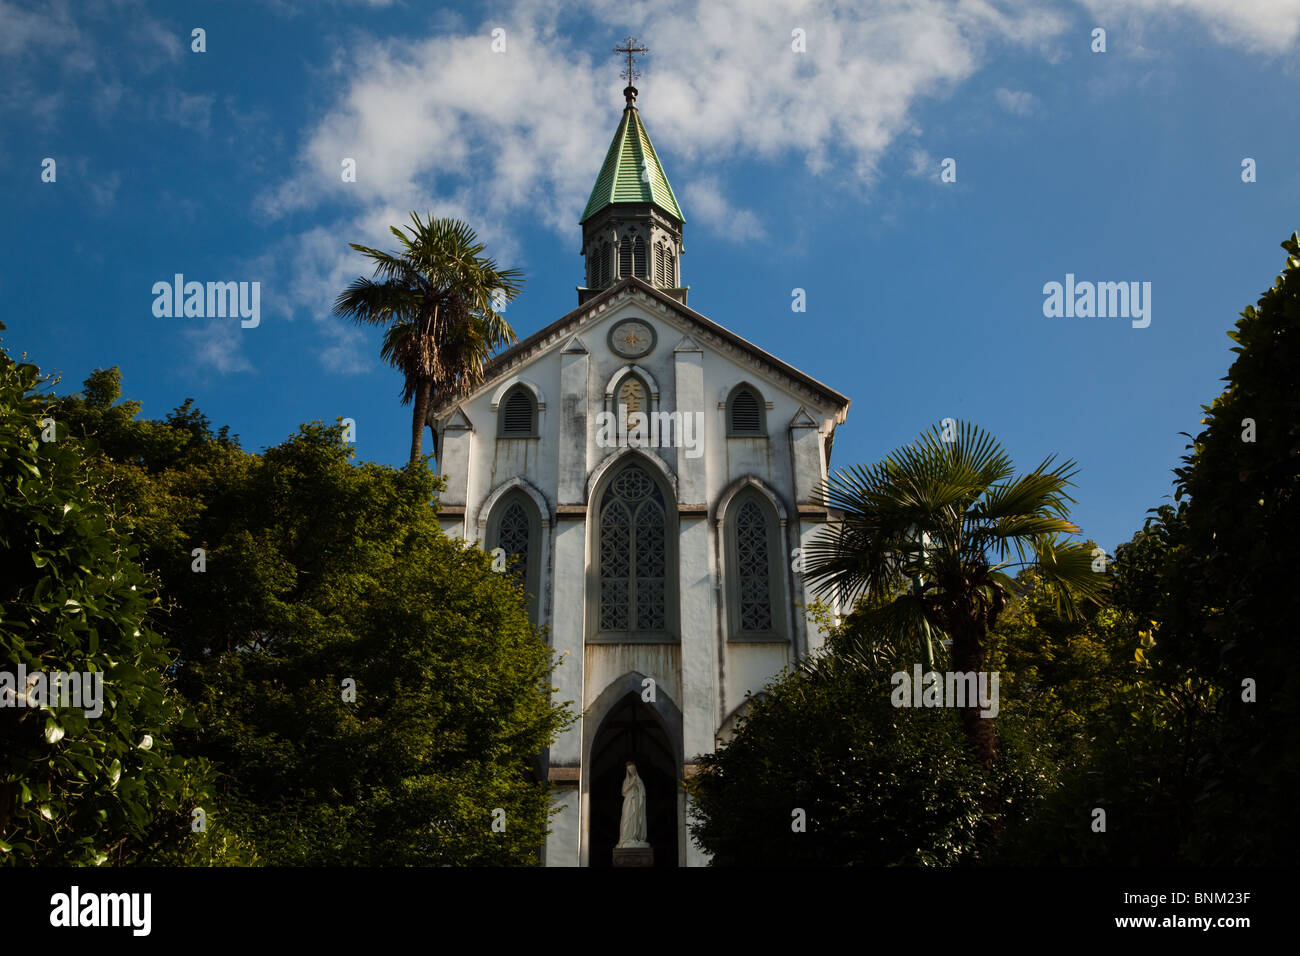 Oura Church or Oura Tenshudo is a Roman Catholic church in Nagasaki.  It is also known as the Church of the 26 Japanese Martyrs. Stock Photo